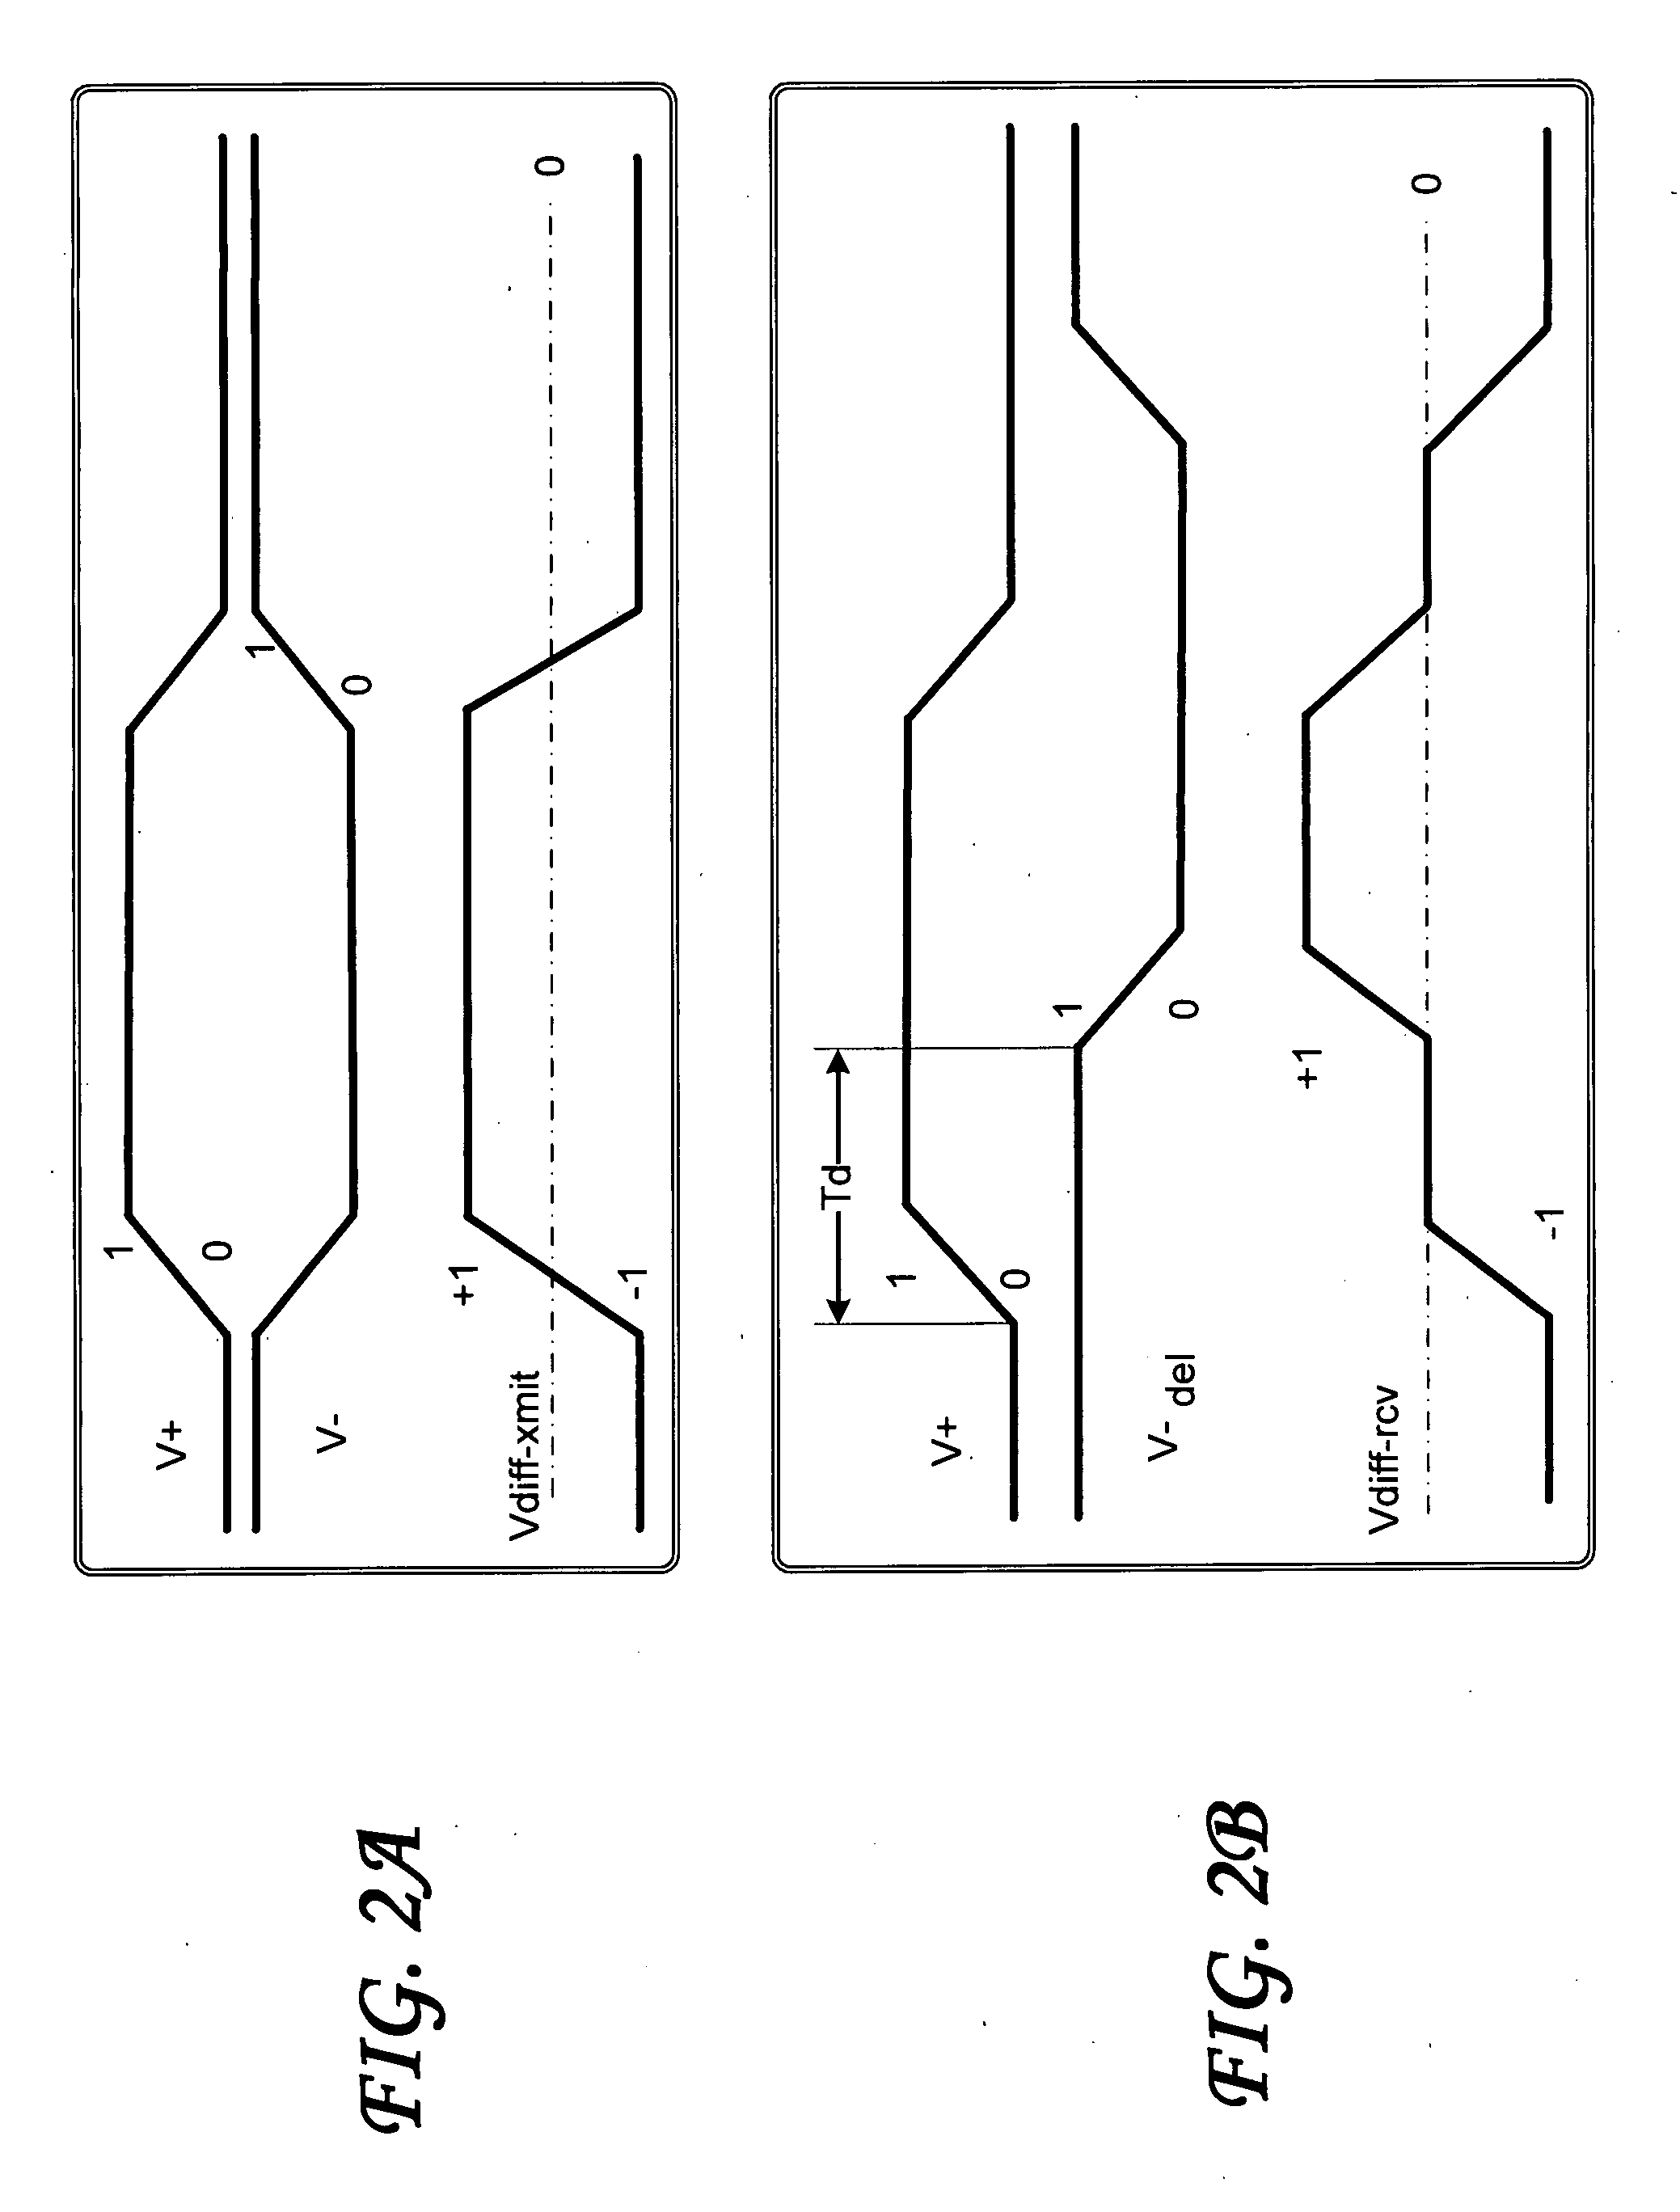 Programmable cable with deskew and performance analysis circuits